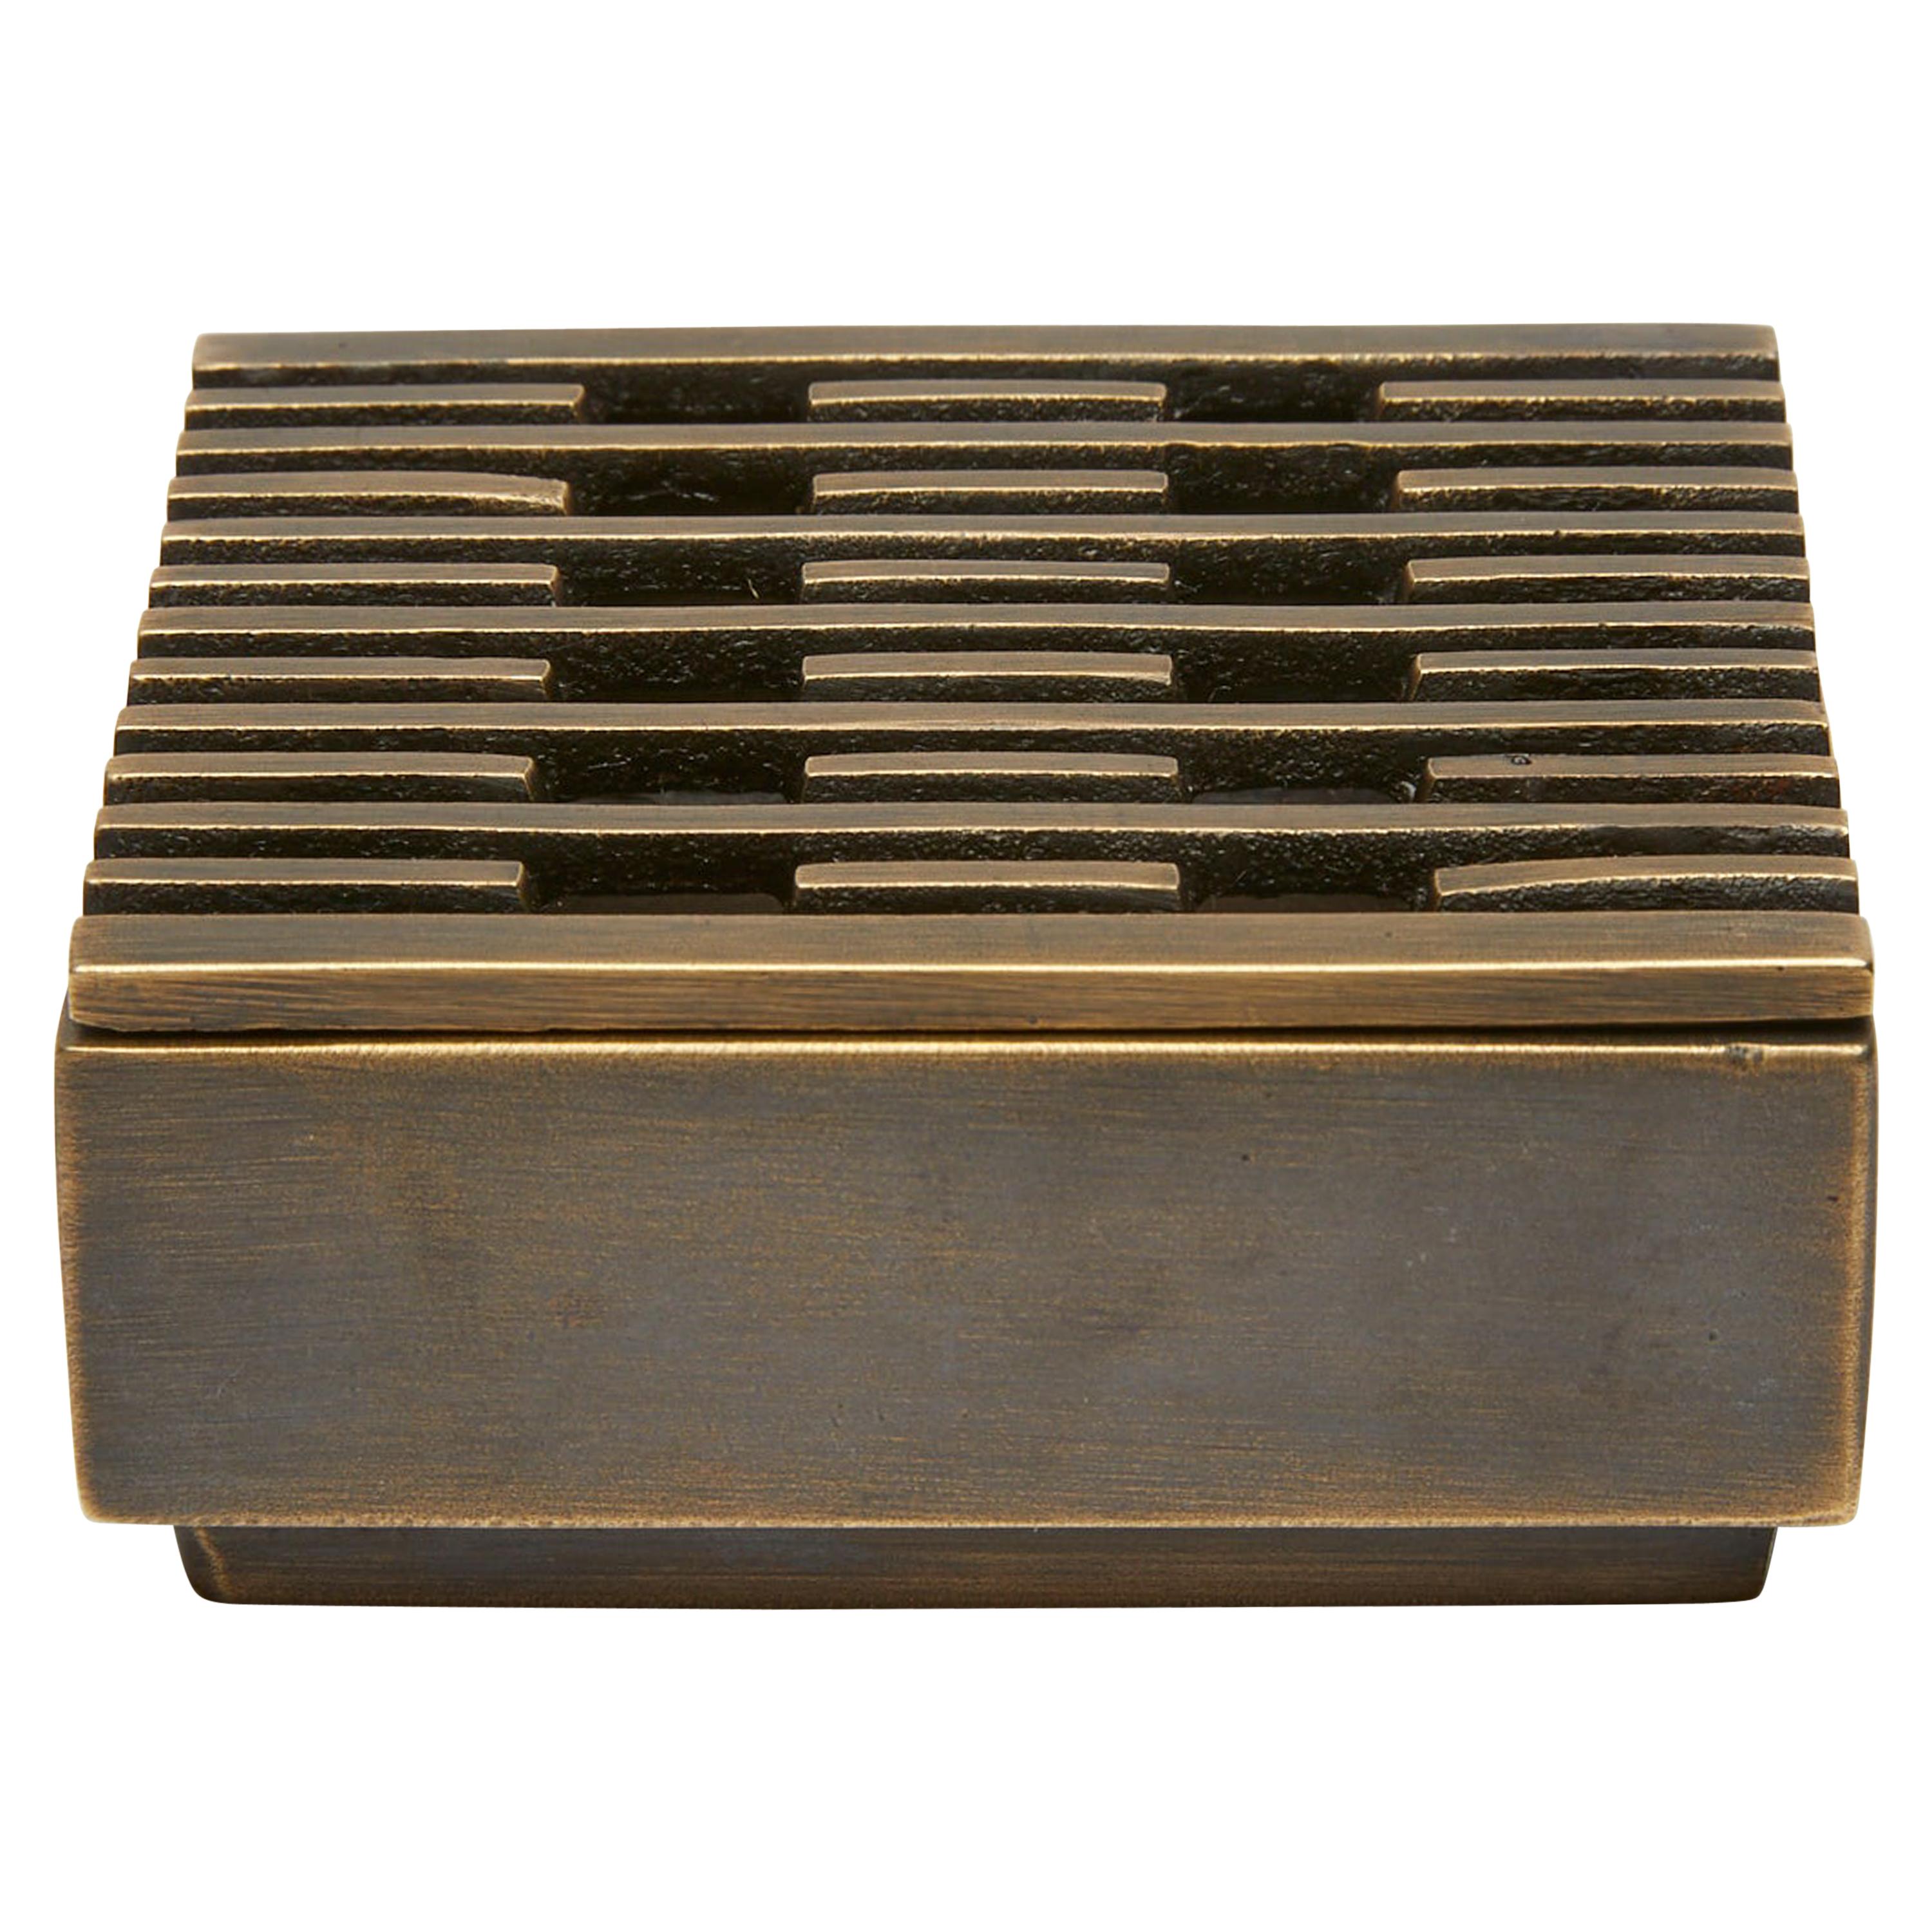 Contemporary Bronze Incense Box or ashtray, LINES by Reda Amalou, 2020